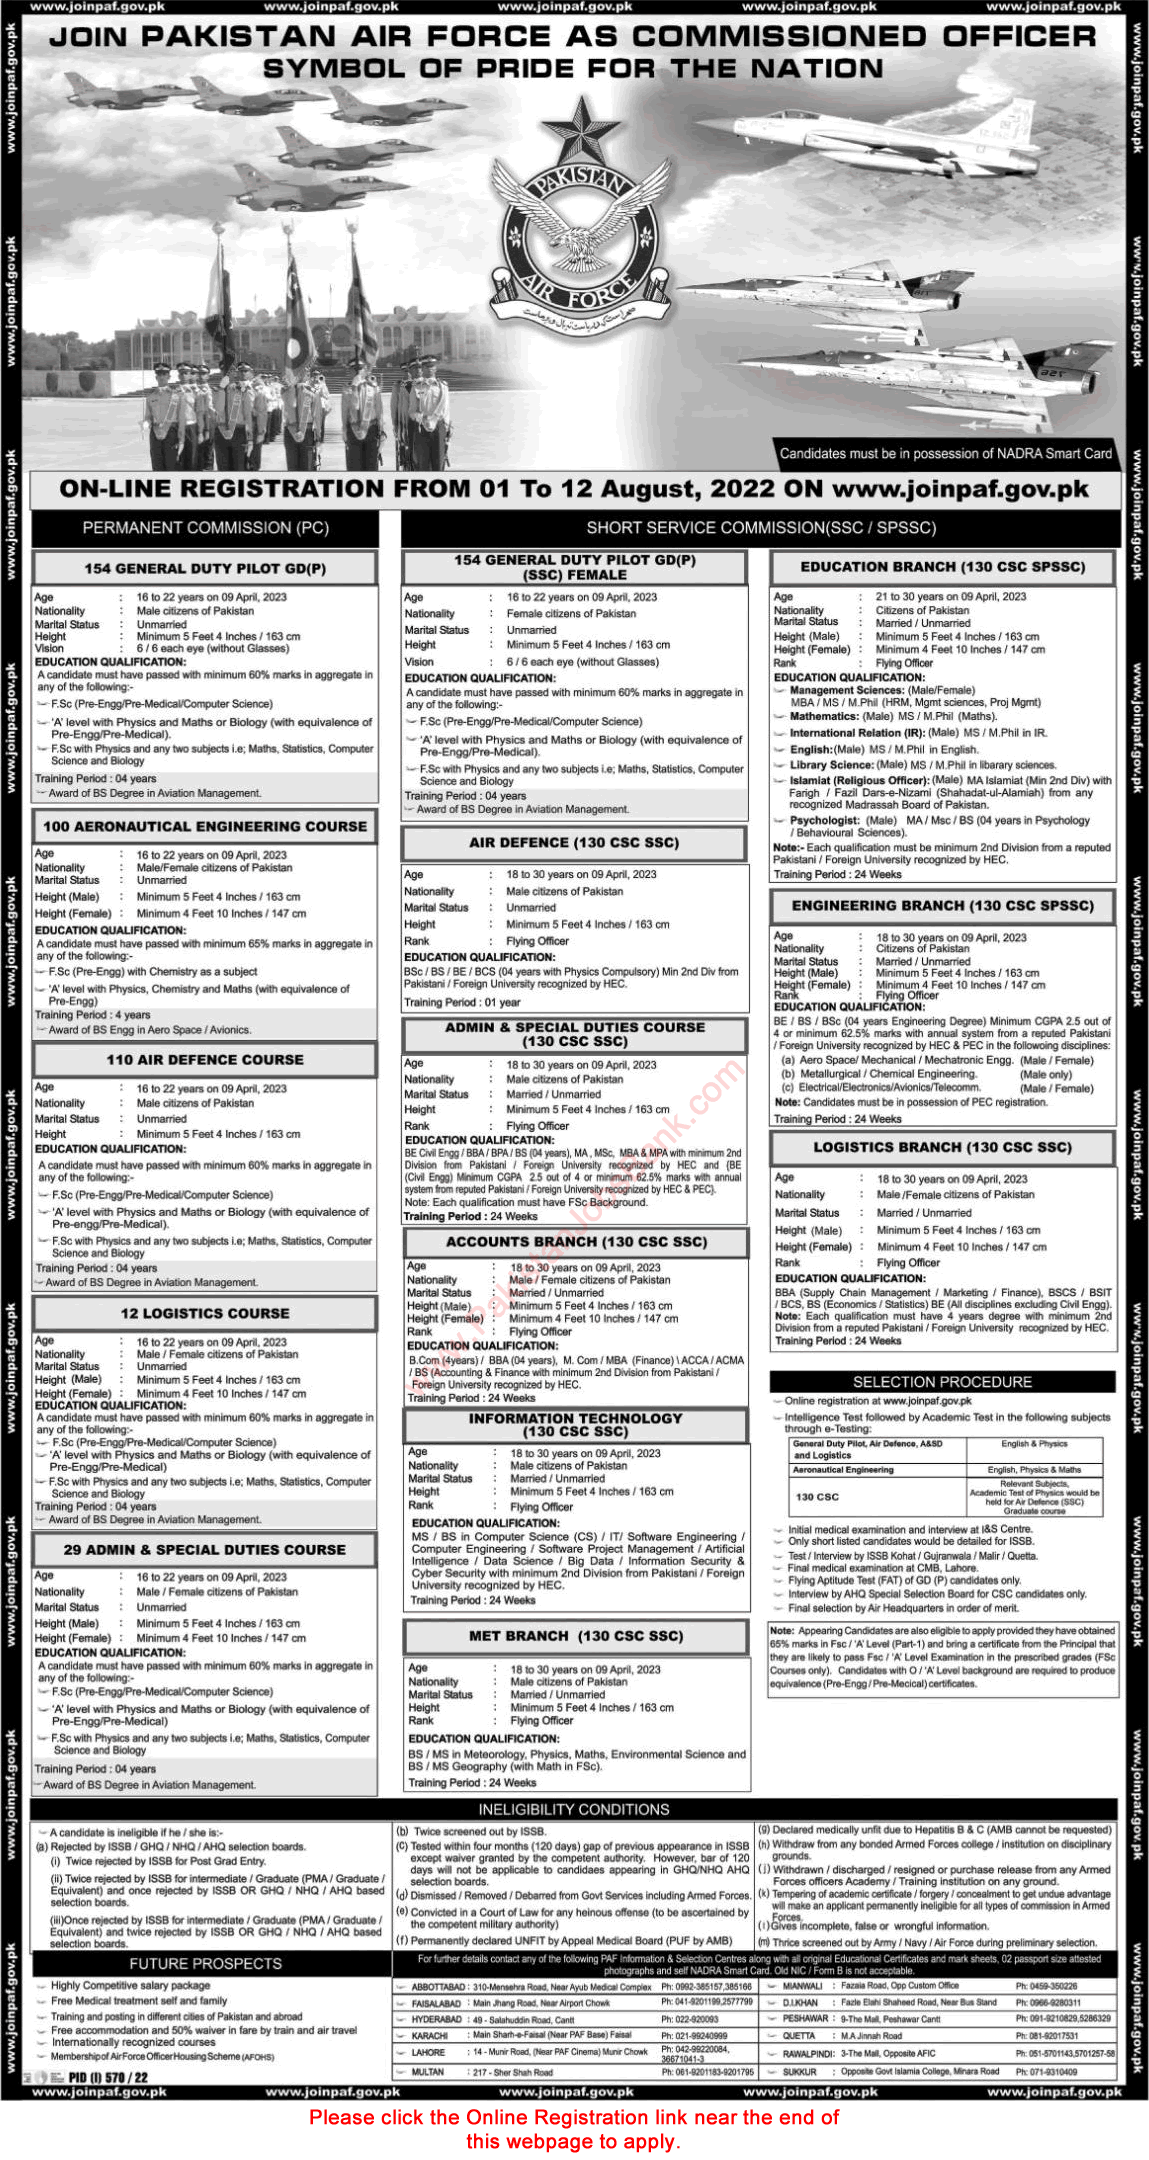 Join Pakistan Air Force as Commissioned Officer July 2022 August Online Registration in SPSSC & Permanent Commission Latest